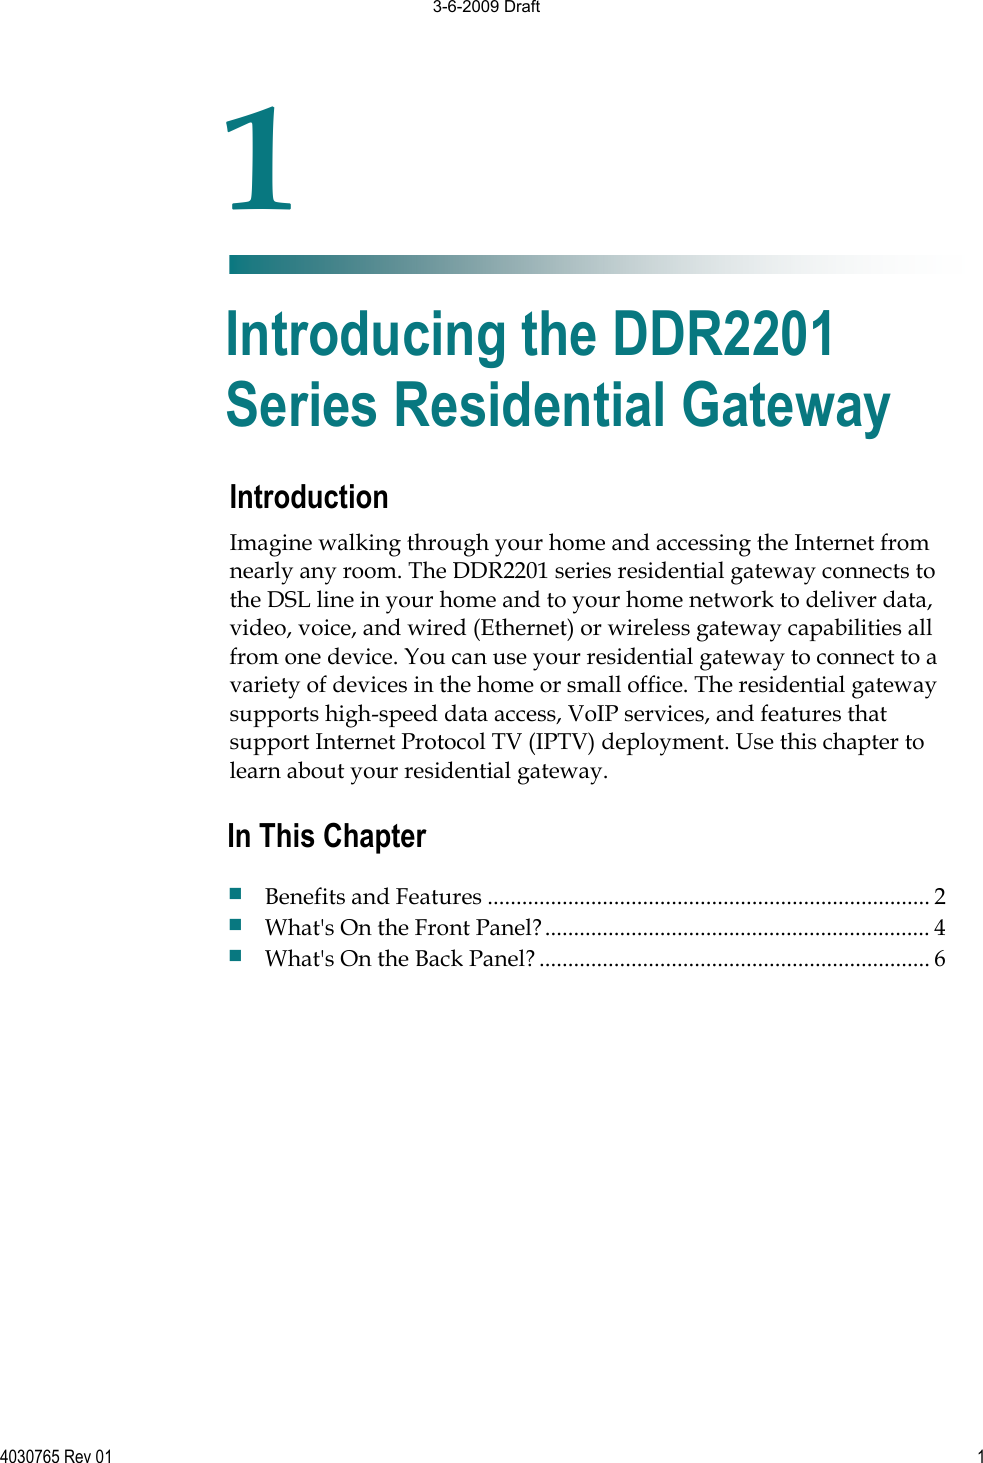 4030765 Rev 01 1Introduction Imagine walking through your home and accessing the Internet from nearly any room. The DDR2201 series residential gateway connects to the DSL line in your home and to your home network to deliver data, video, voice, and wired (Ethernet) or wireless gateway capabilities all from one device. You can use your residential gateway to connect to a variety of devices in the home or small office. The residential gateway supports high-speed data access, VoIP services, and features that support Internet Protocol TV (IPTV) deployment. Use this chapter to learn about your residential gateway. 1Chapter 1Introducing the DDR2201 Series Residential Gateway In This Chapter Benefits and Features ............................................................................. 2 What&apos;s On the Front Panel?................................................................... 4 What&apos;s On the Back Panel?.................................................................... 6 3-6-2009 Draft